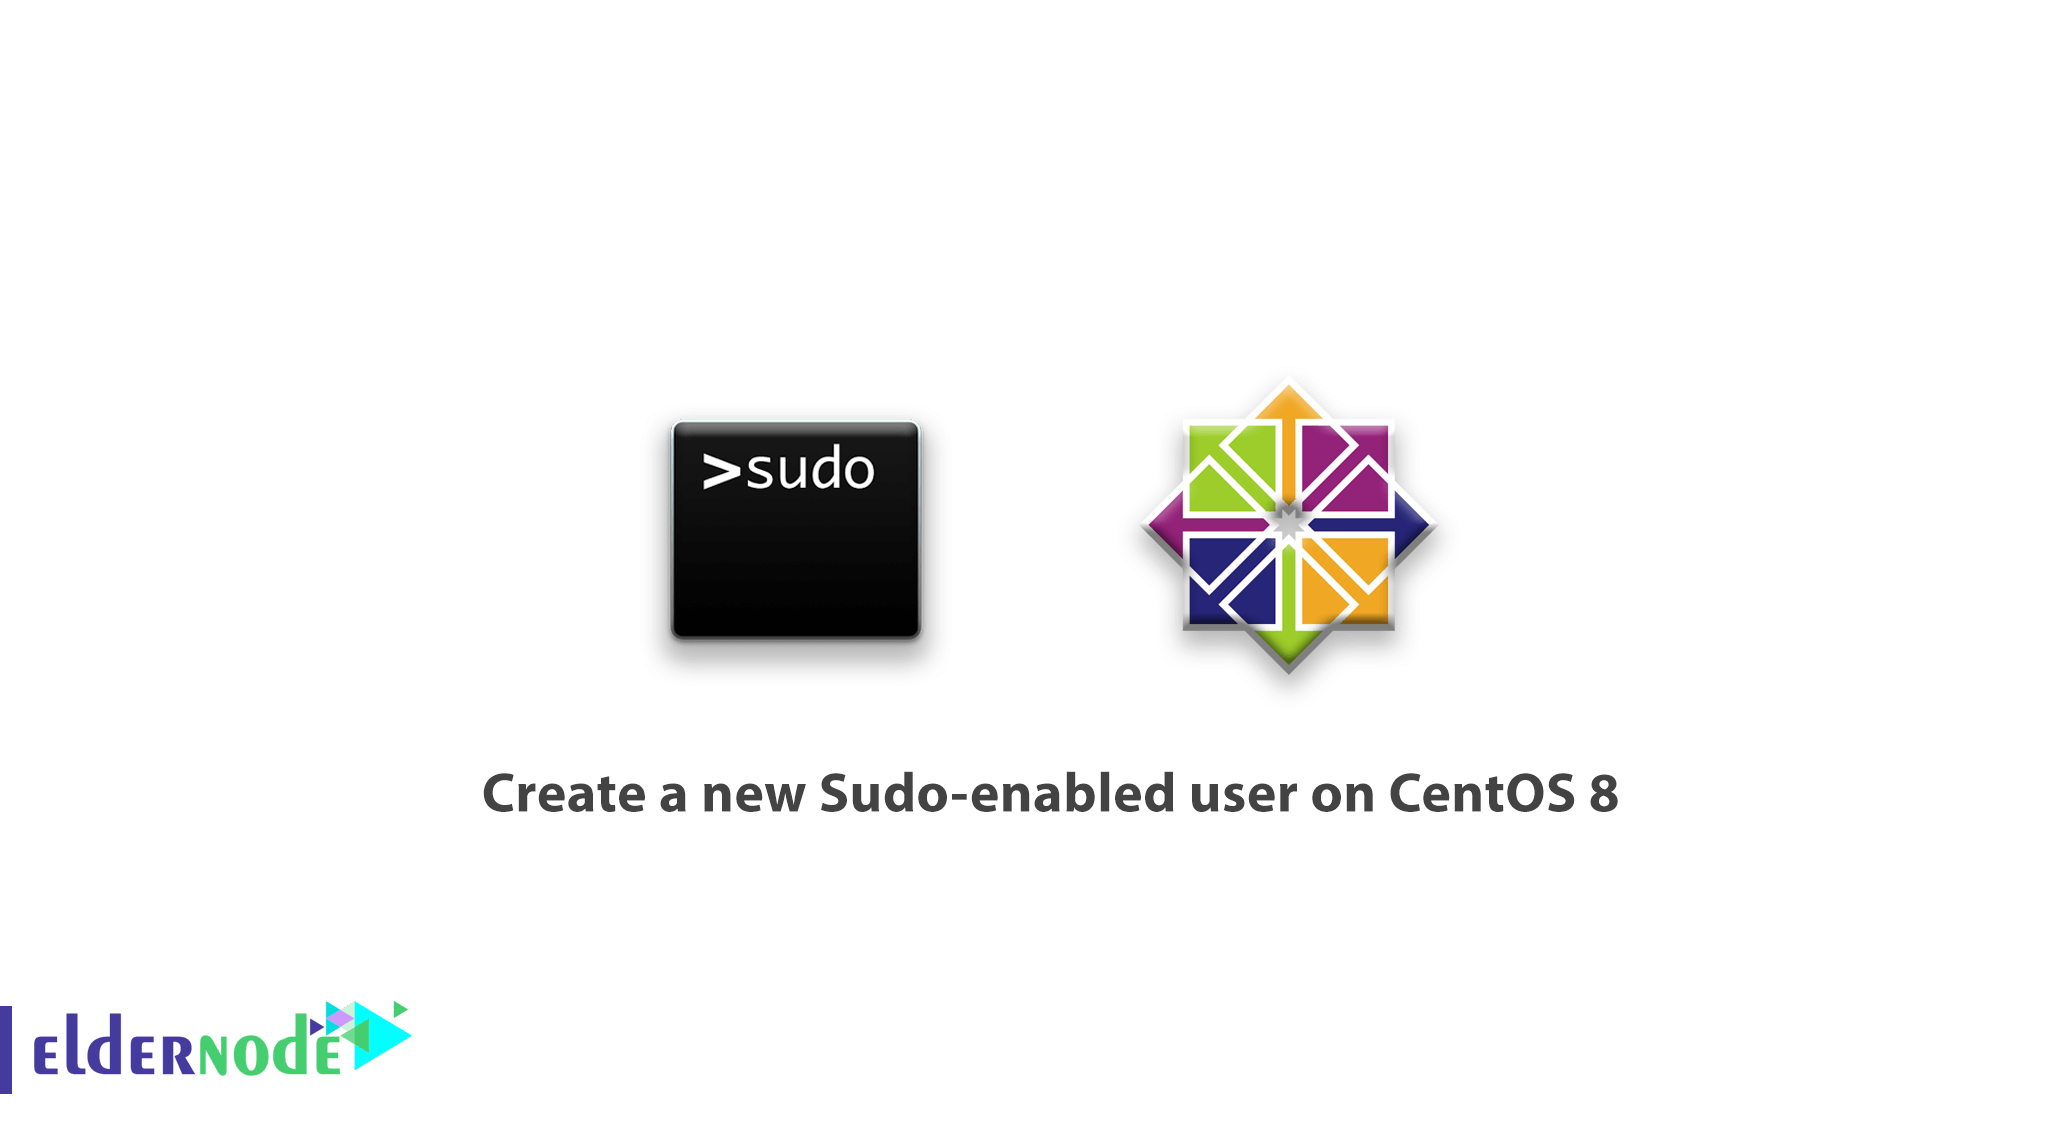 How to create a new Sudo-enabled user on CentOS 8